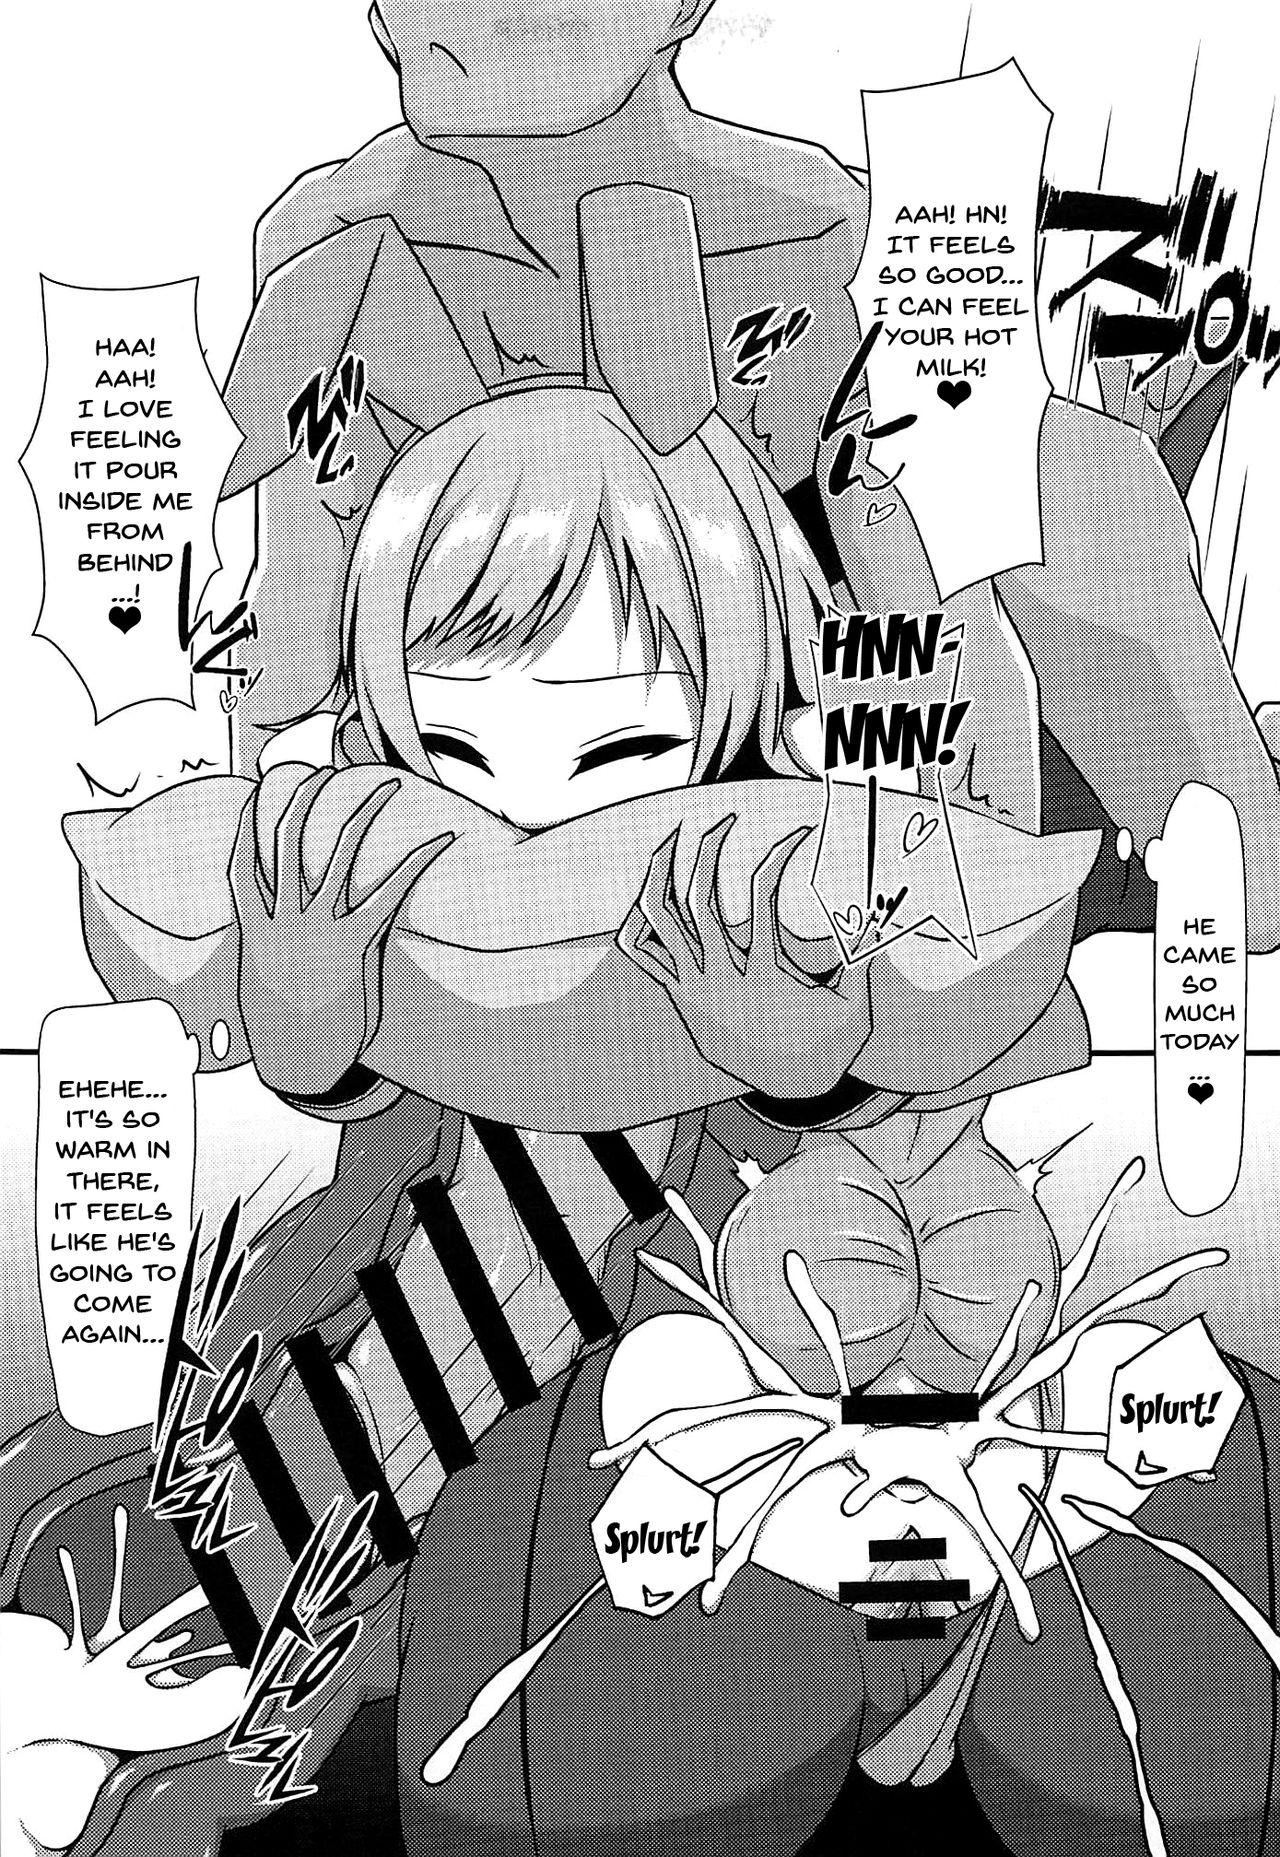 Boobies SHINY BUNNIES - The idolmaster Cousin - Page 6